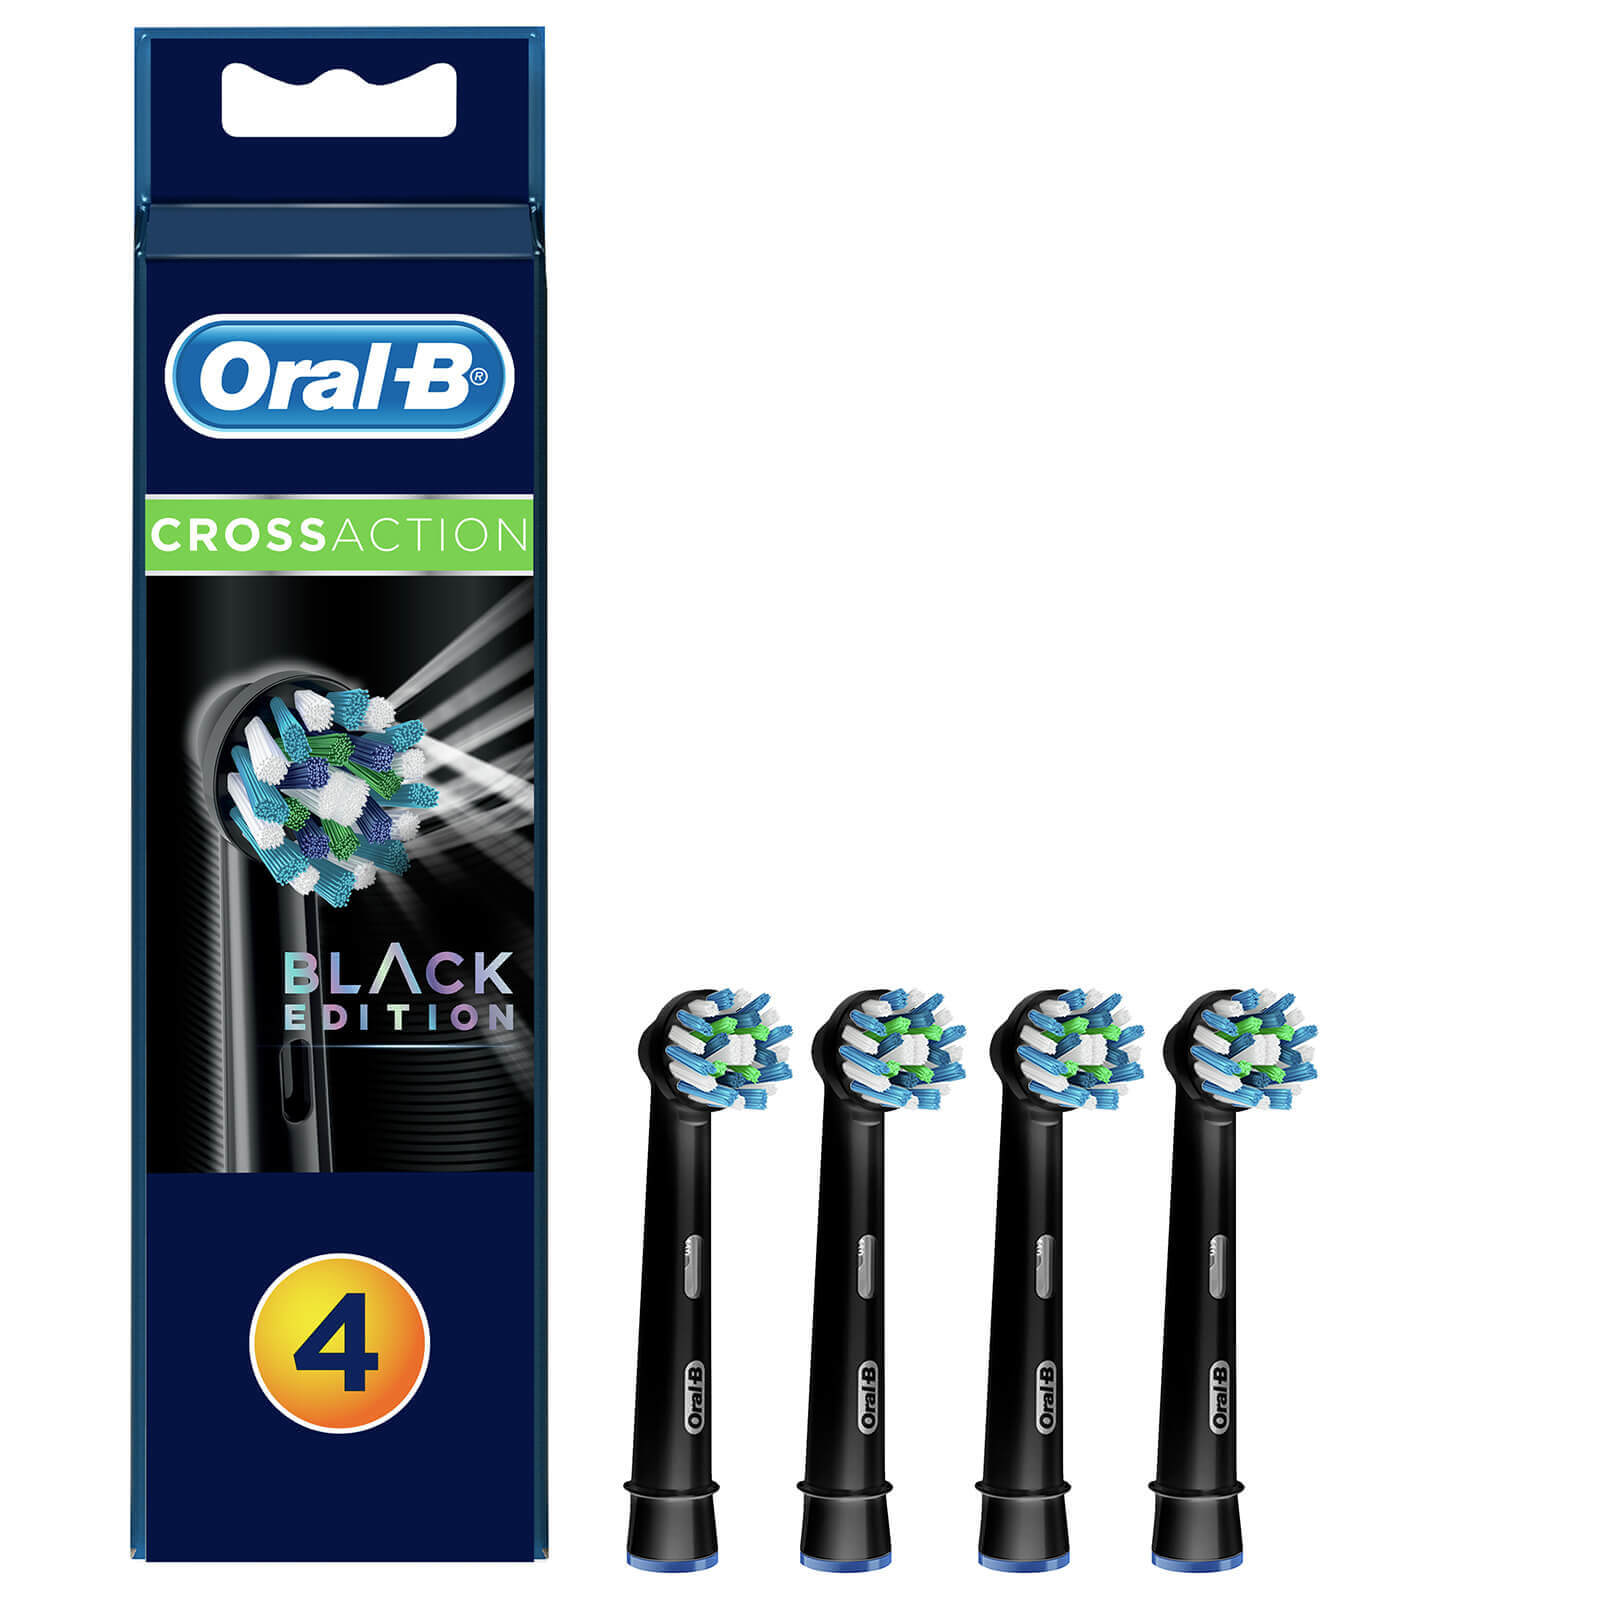 Oral B CrossAction Replacement Electric Toothbrush Heads - Black Edition (Pack of 4)